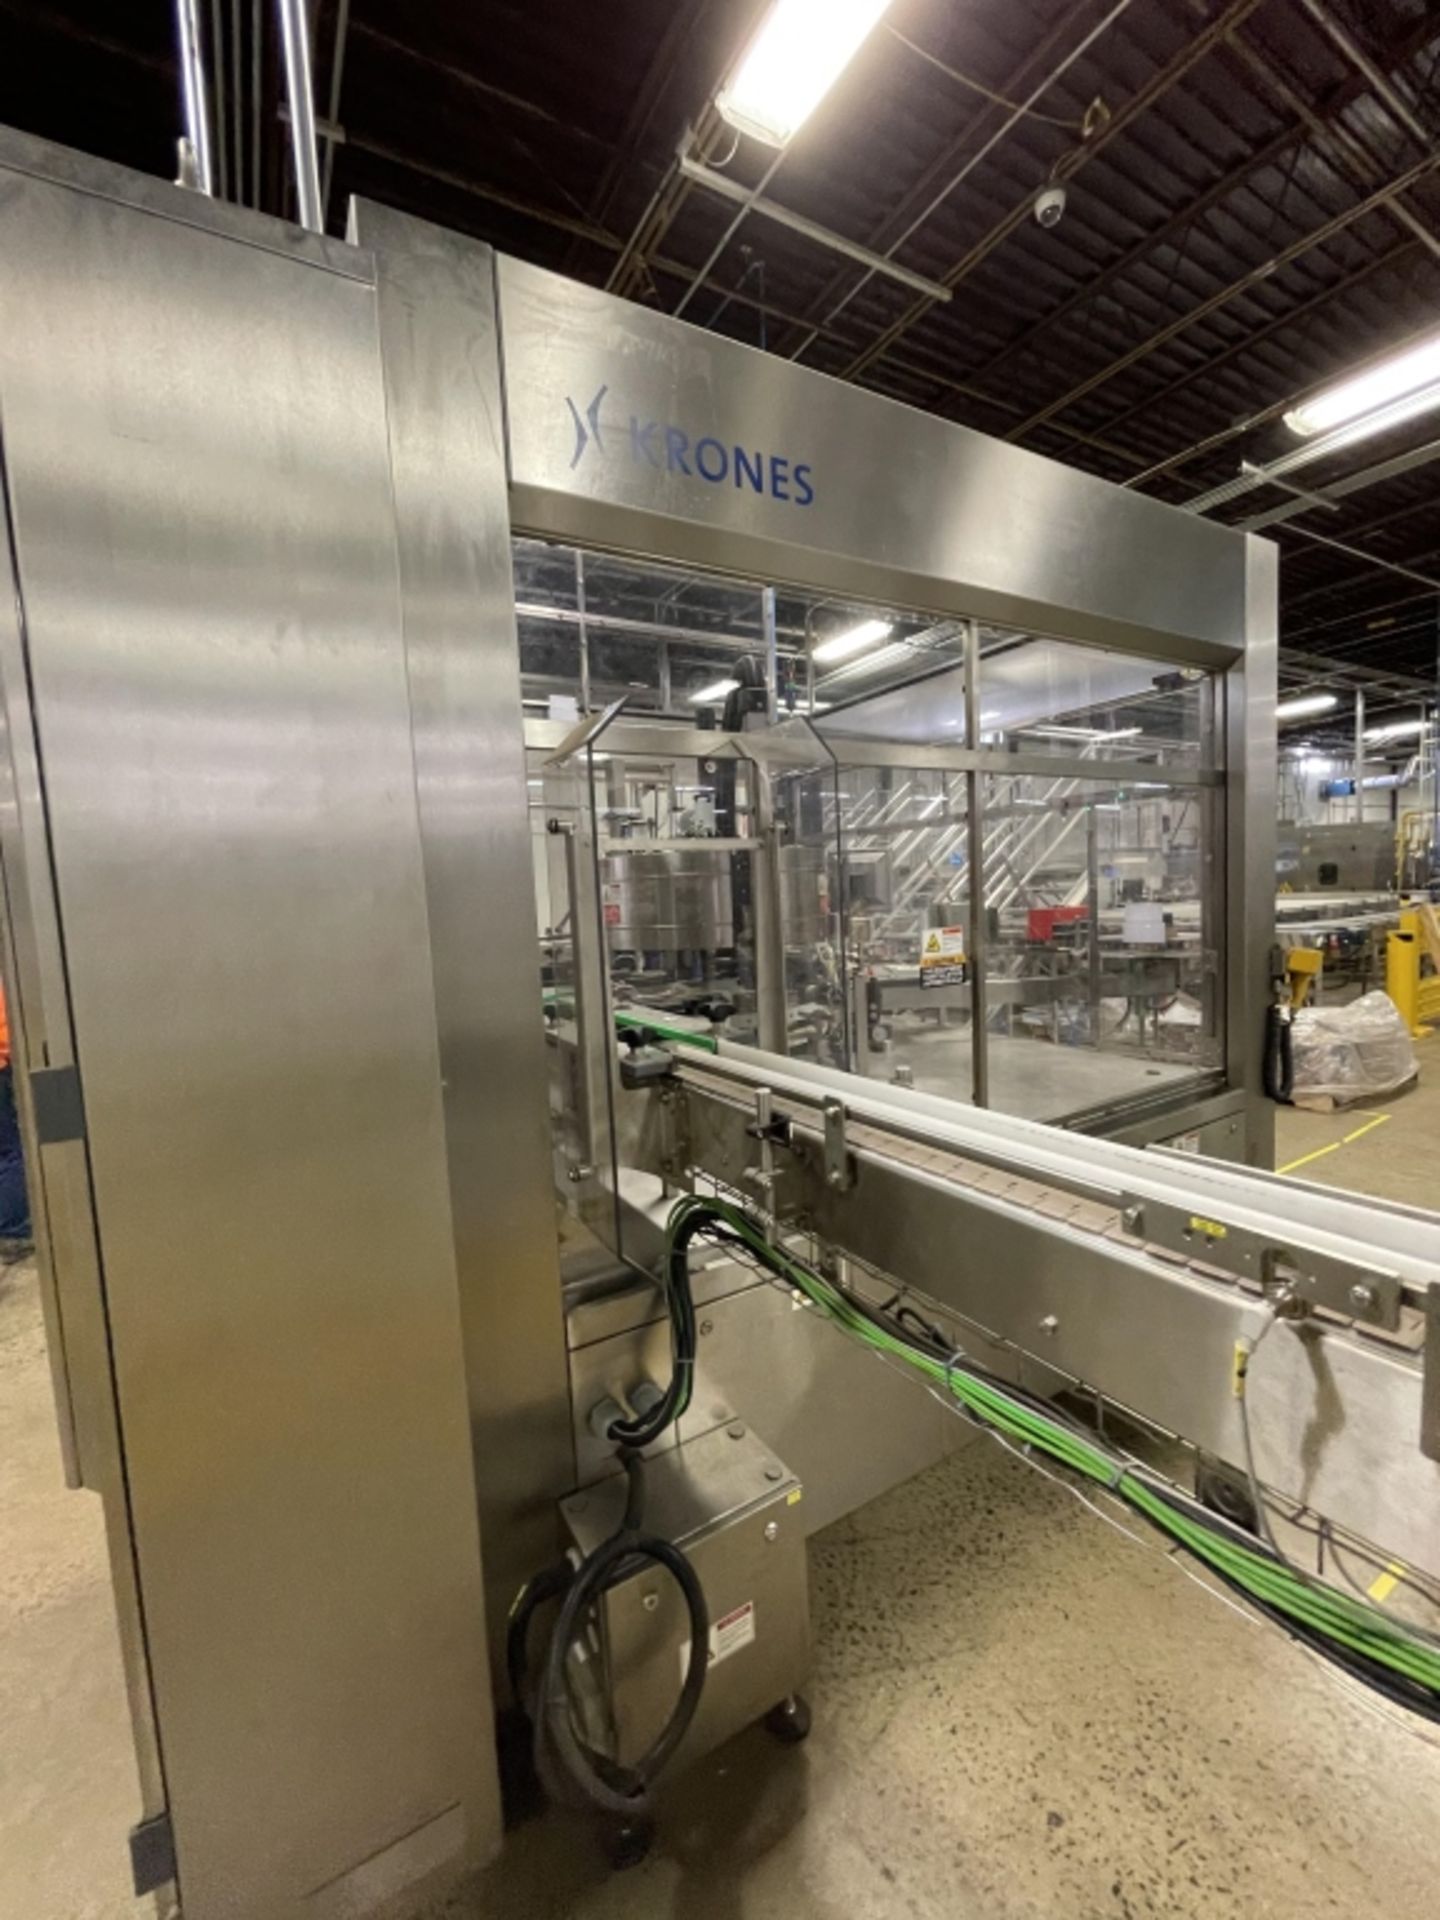 KRONES CONTIROLL ROLL-FED WRAP AROUND LABELER, S/N K745X66, 340 MM MAX LABEL LENGTH, 175 MIN LABEL - Image 11 of 11